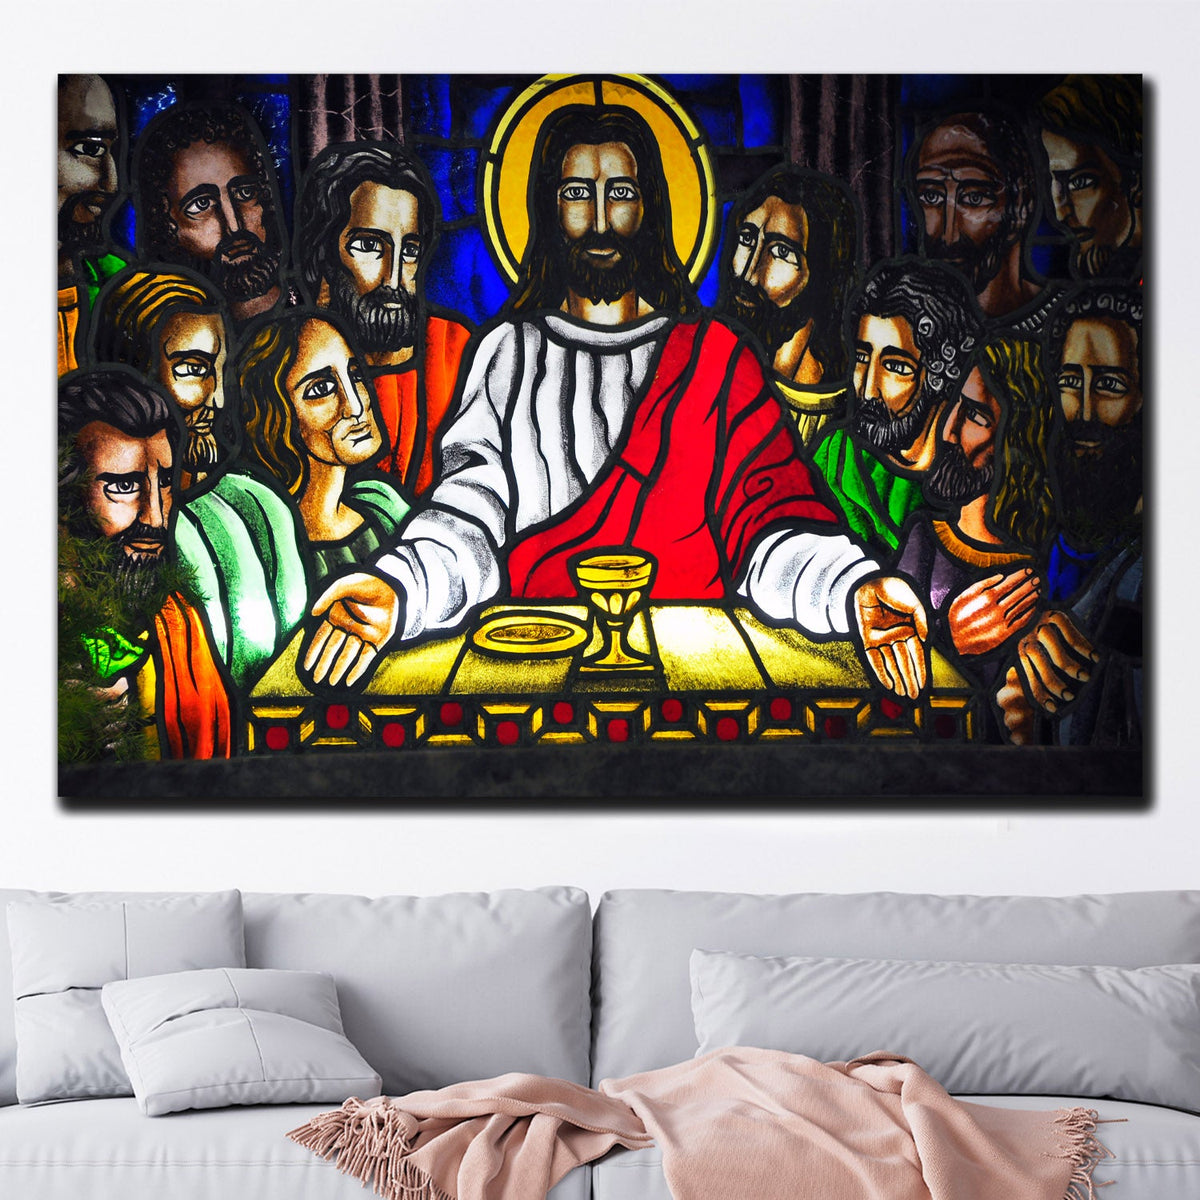 https://cdn.shopify.com/s/files/1/0387/9986/8044/products/TheLastSupperMosaicCanvasArtprintStretched-2.jpg